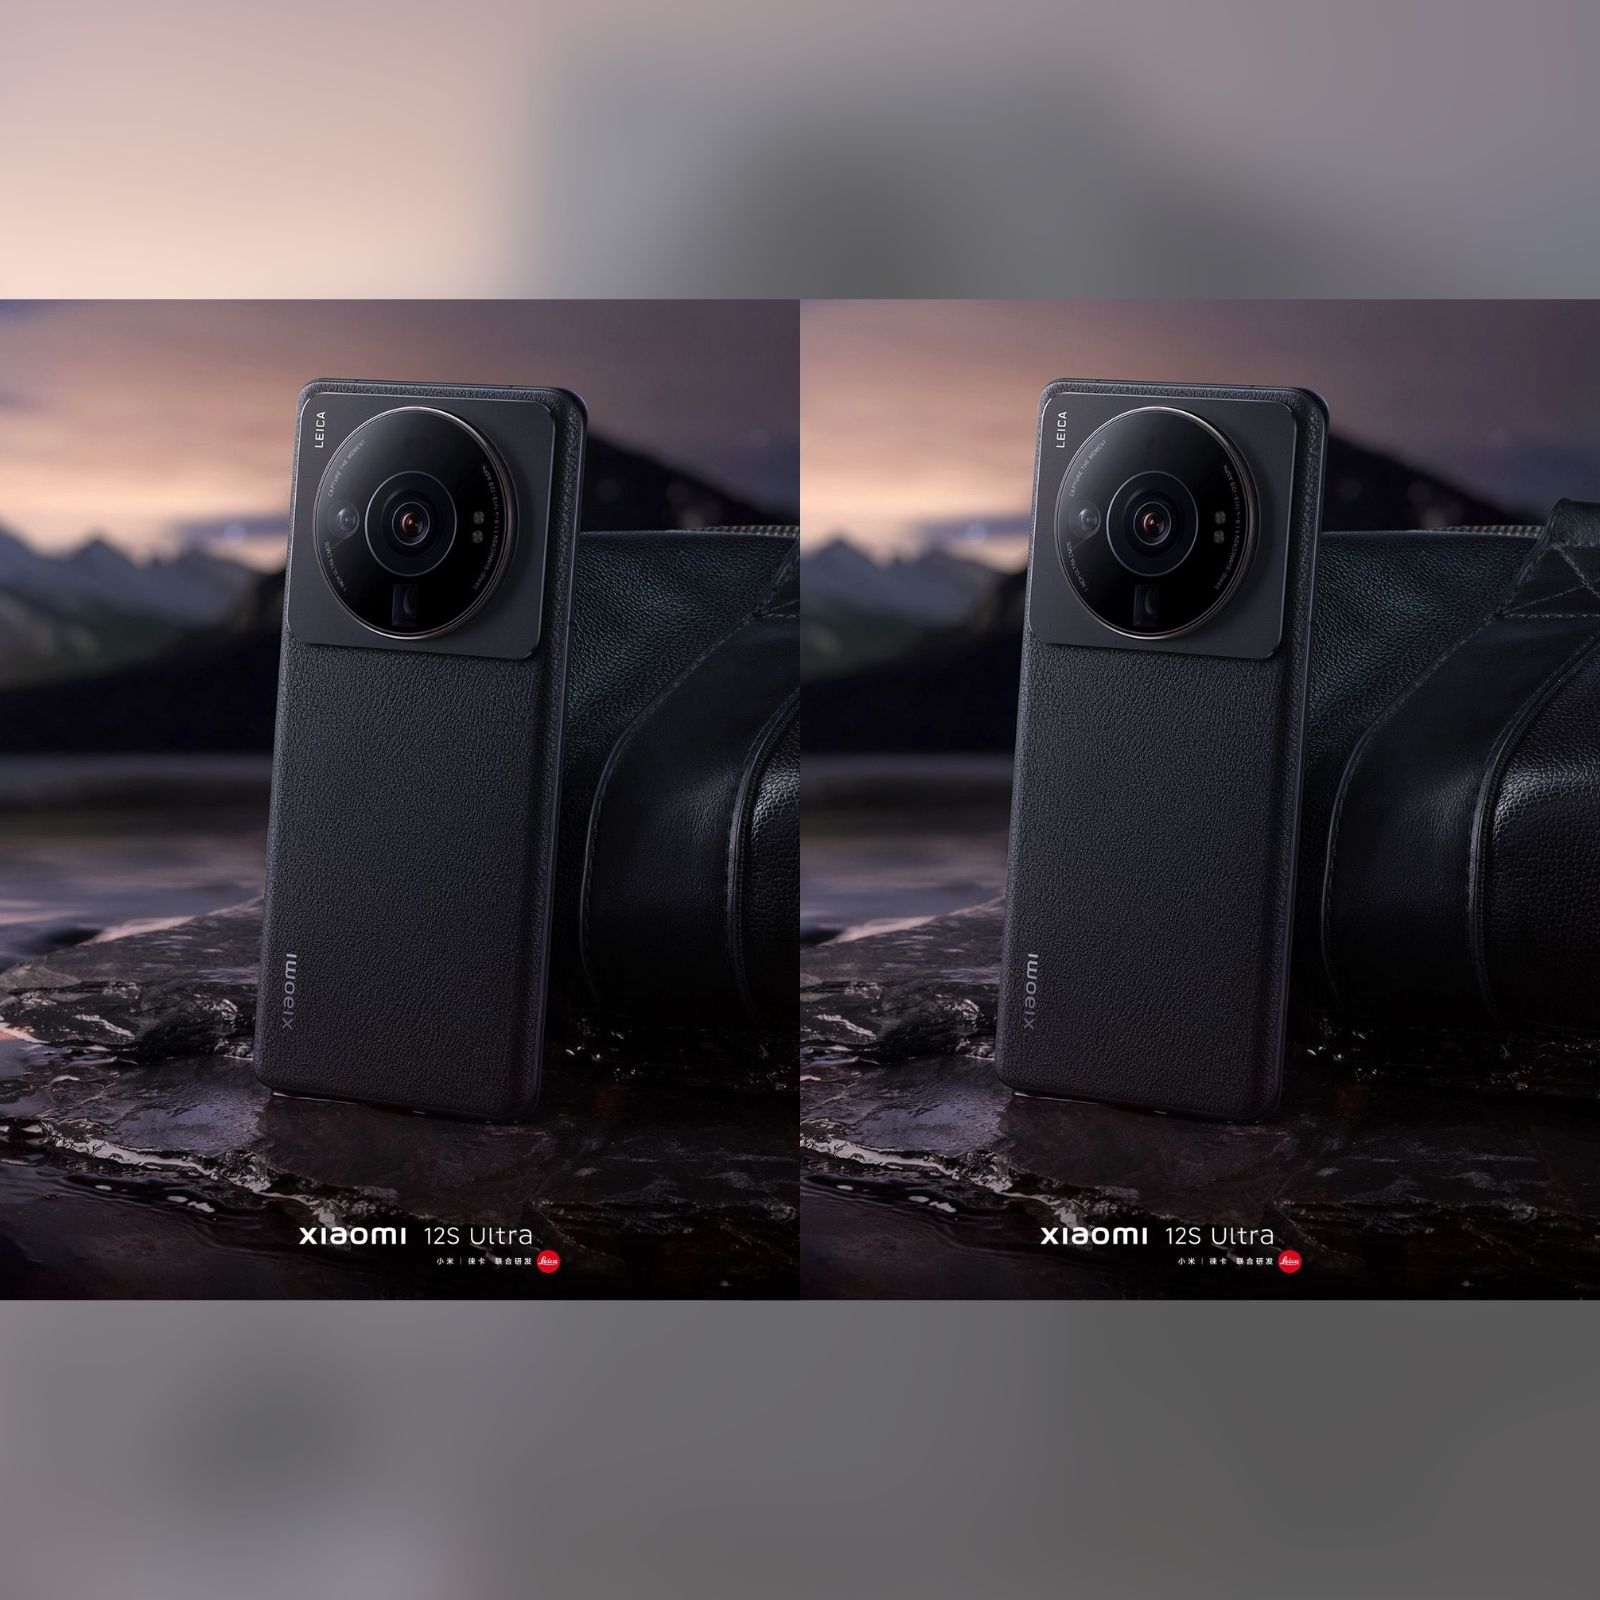 Xiaomi partners with Leica to bring DSLR-like camera capabilities